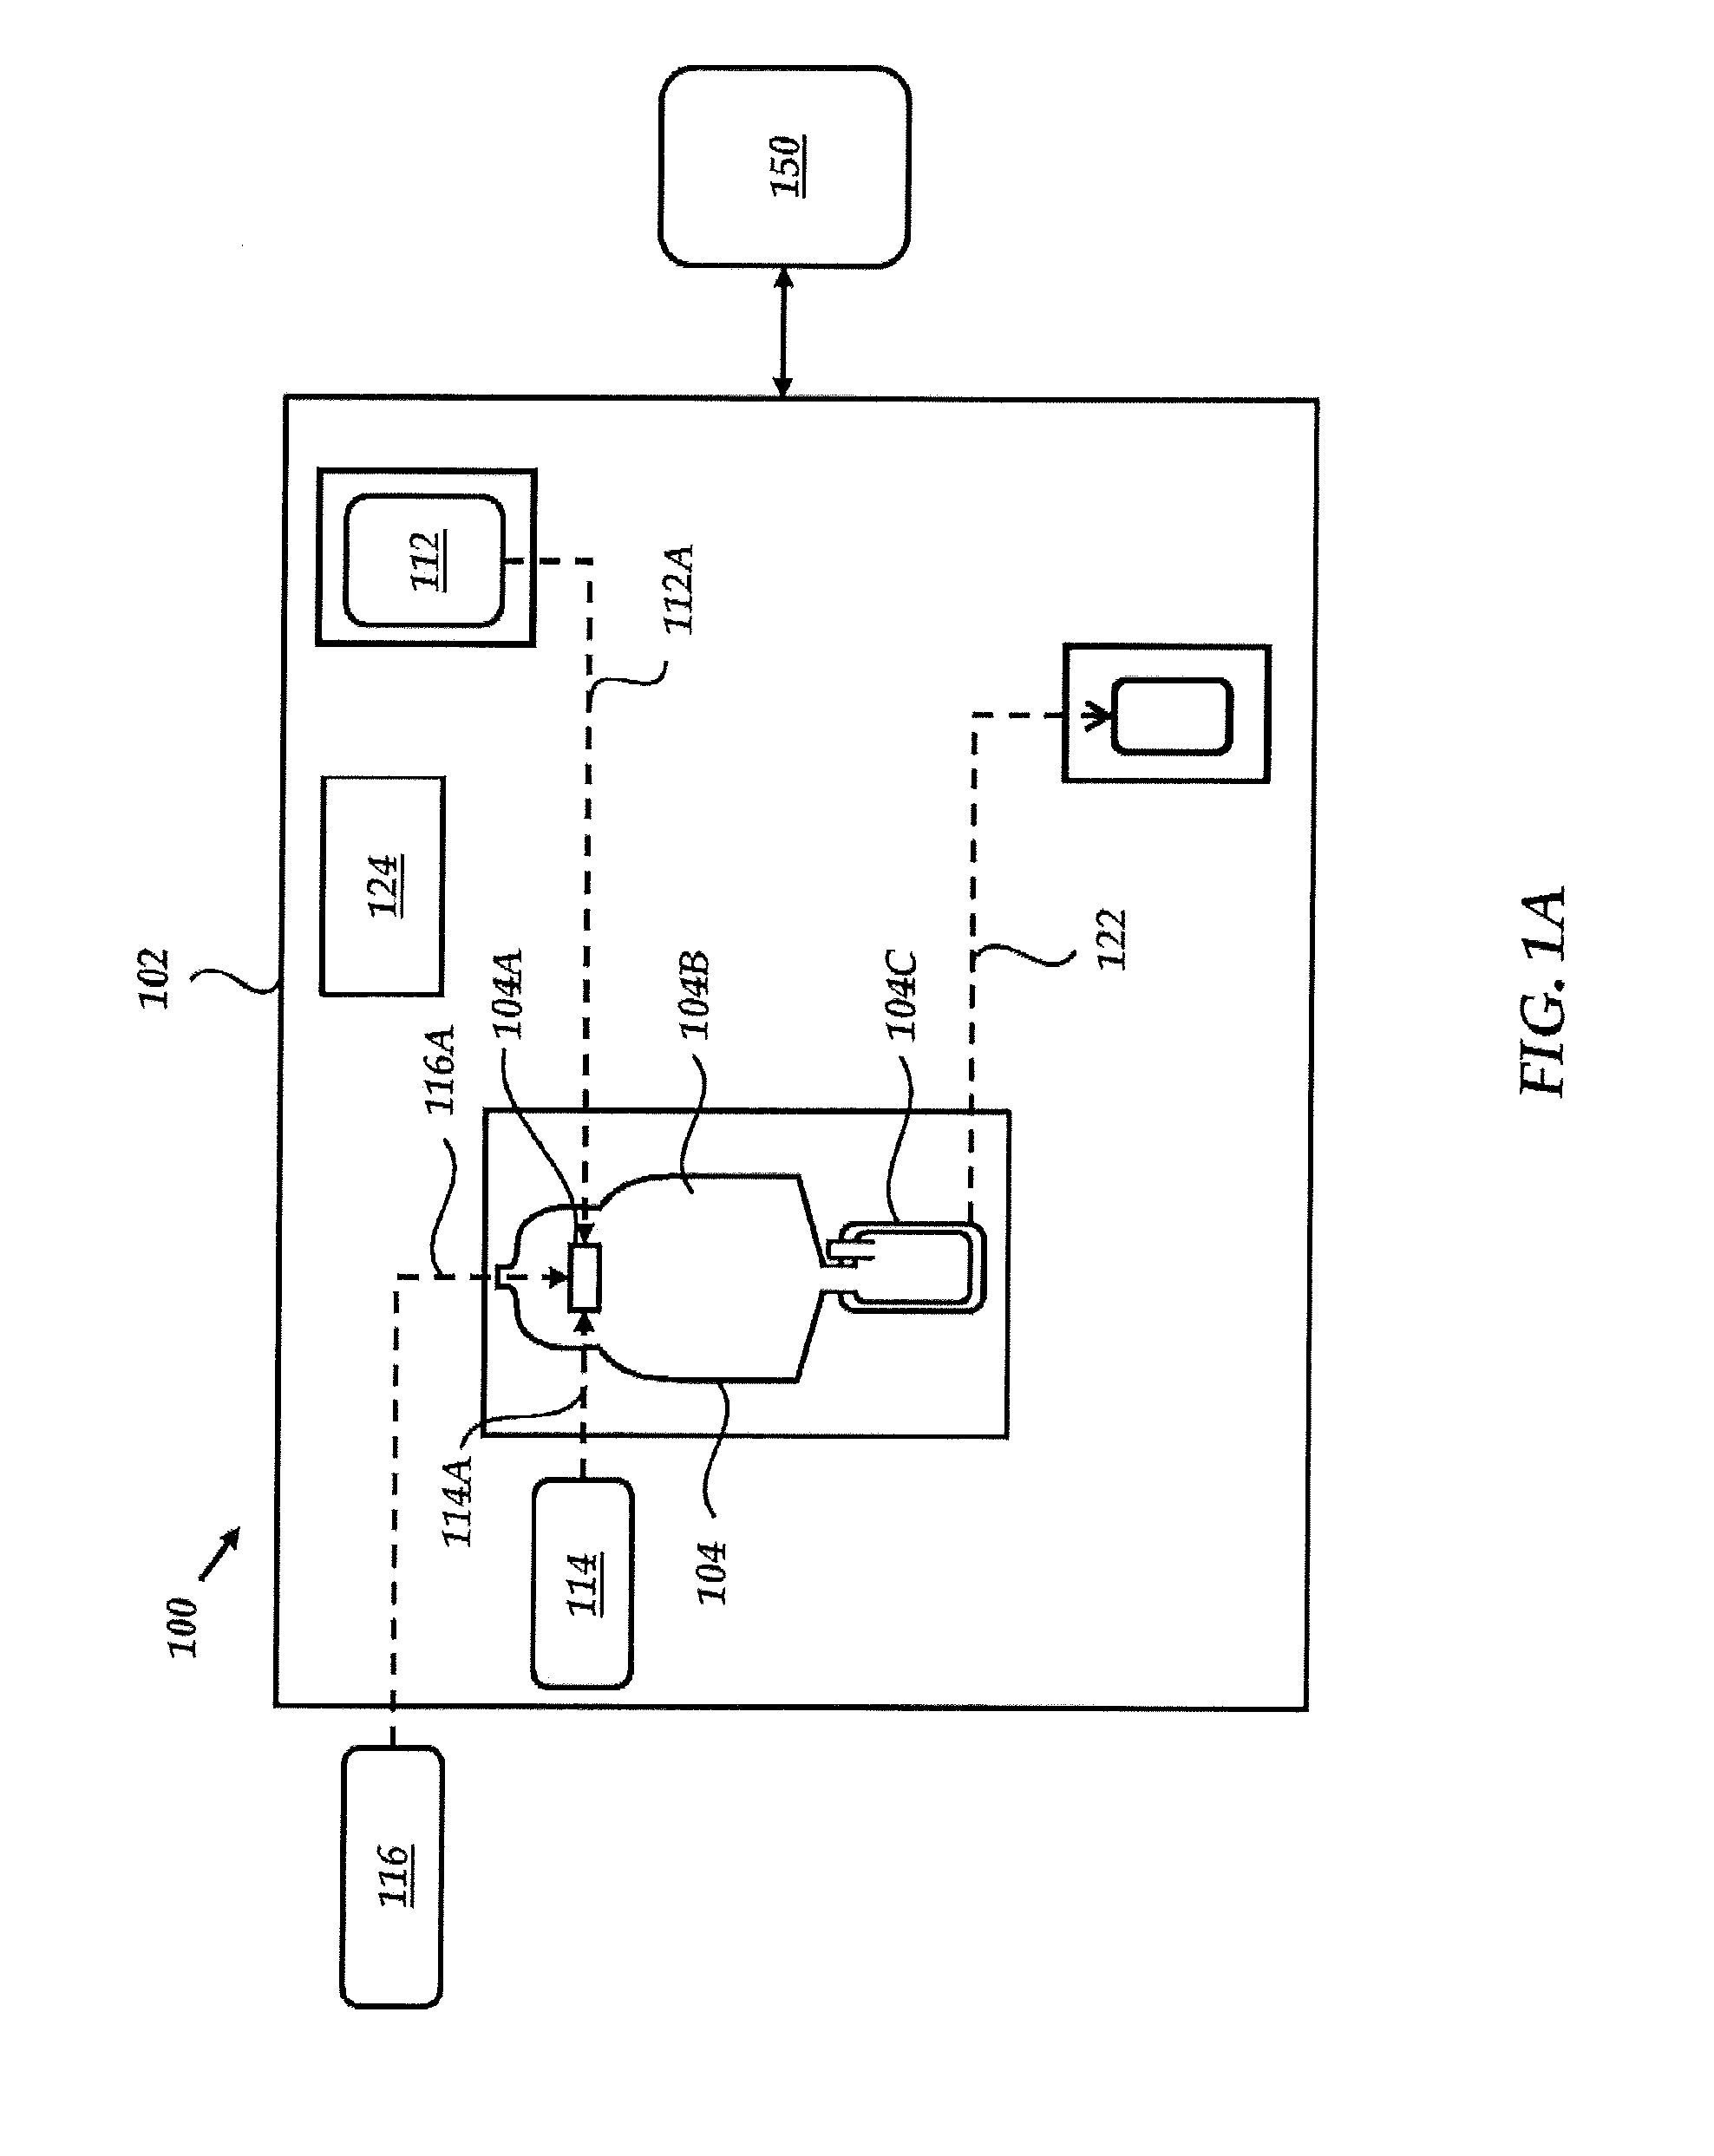 Process control methods for obtaining and maintaining a desired moisture content of spray dried plasma